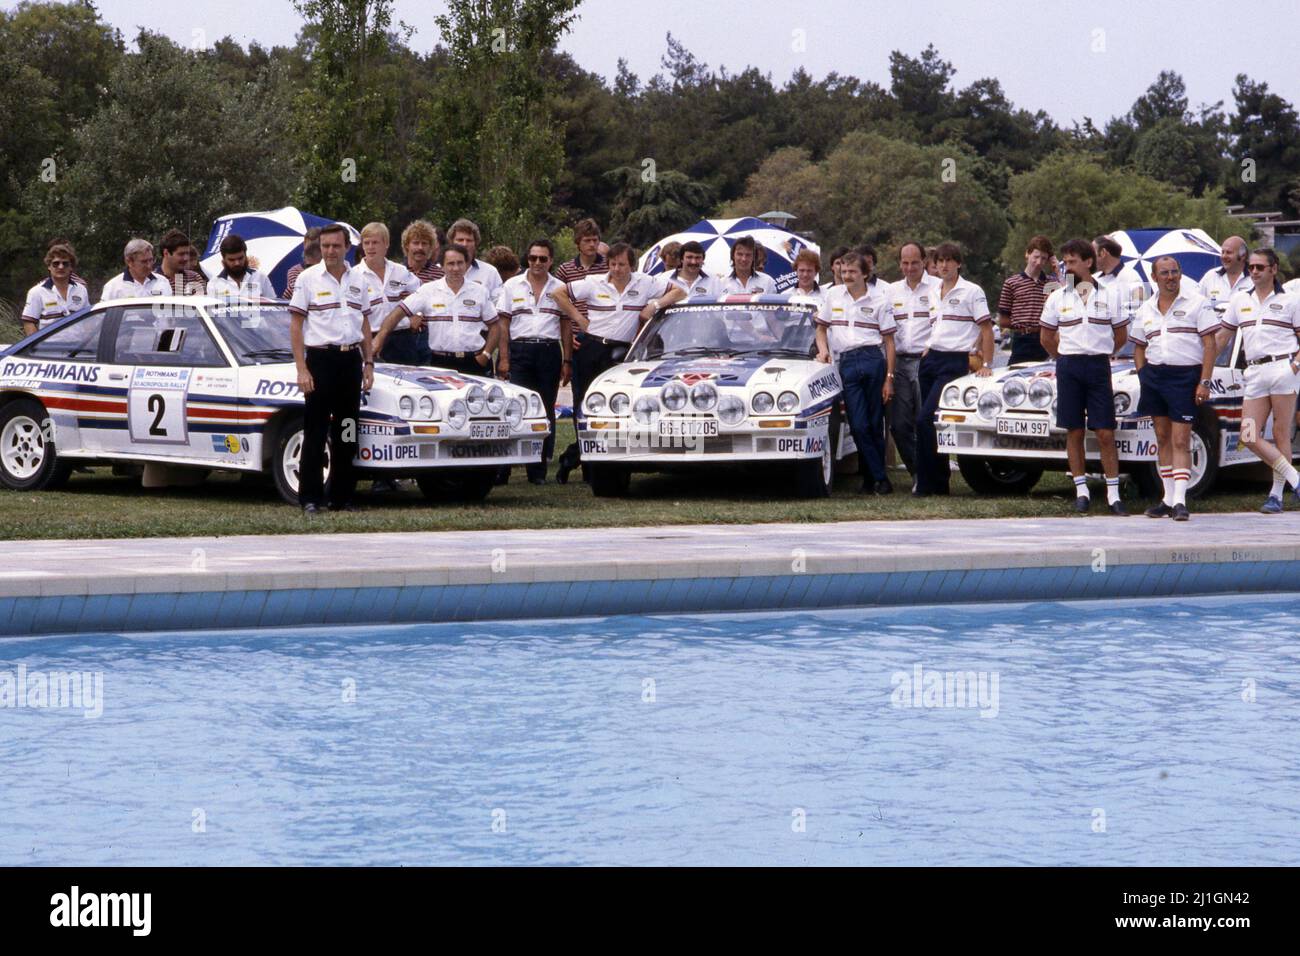 Opel Manta 400 GRB Rothmans Opel Rally Team le photoshoot officiel Banque D'Images